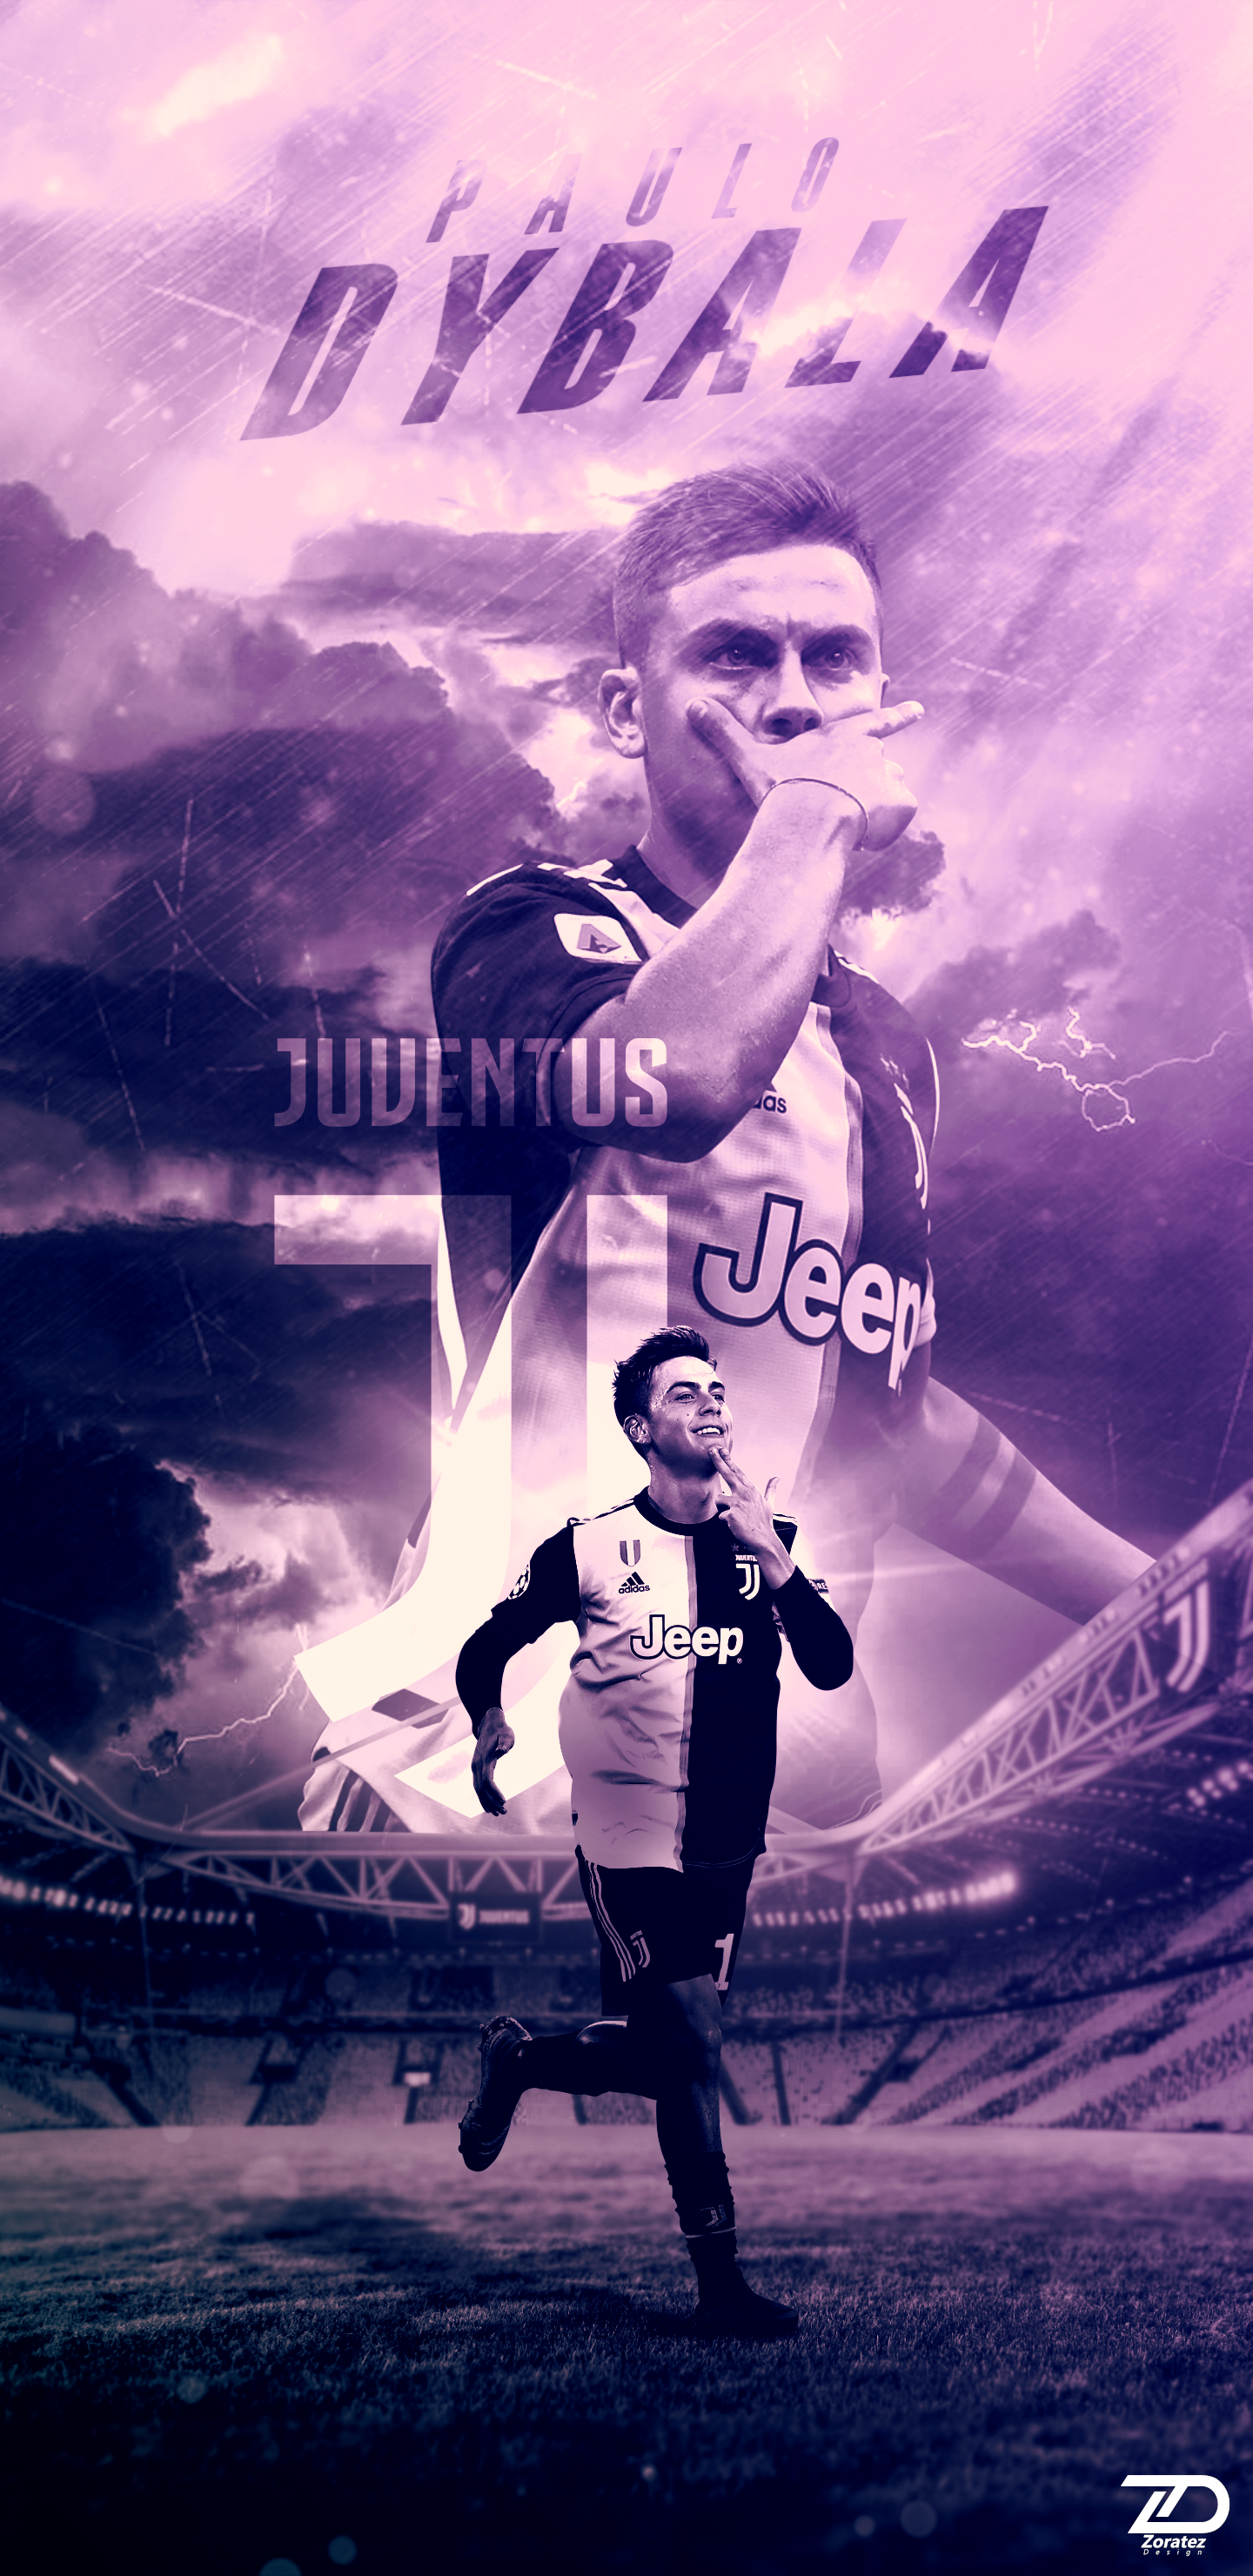 Wallpaper with Dybala